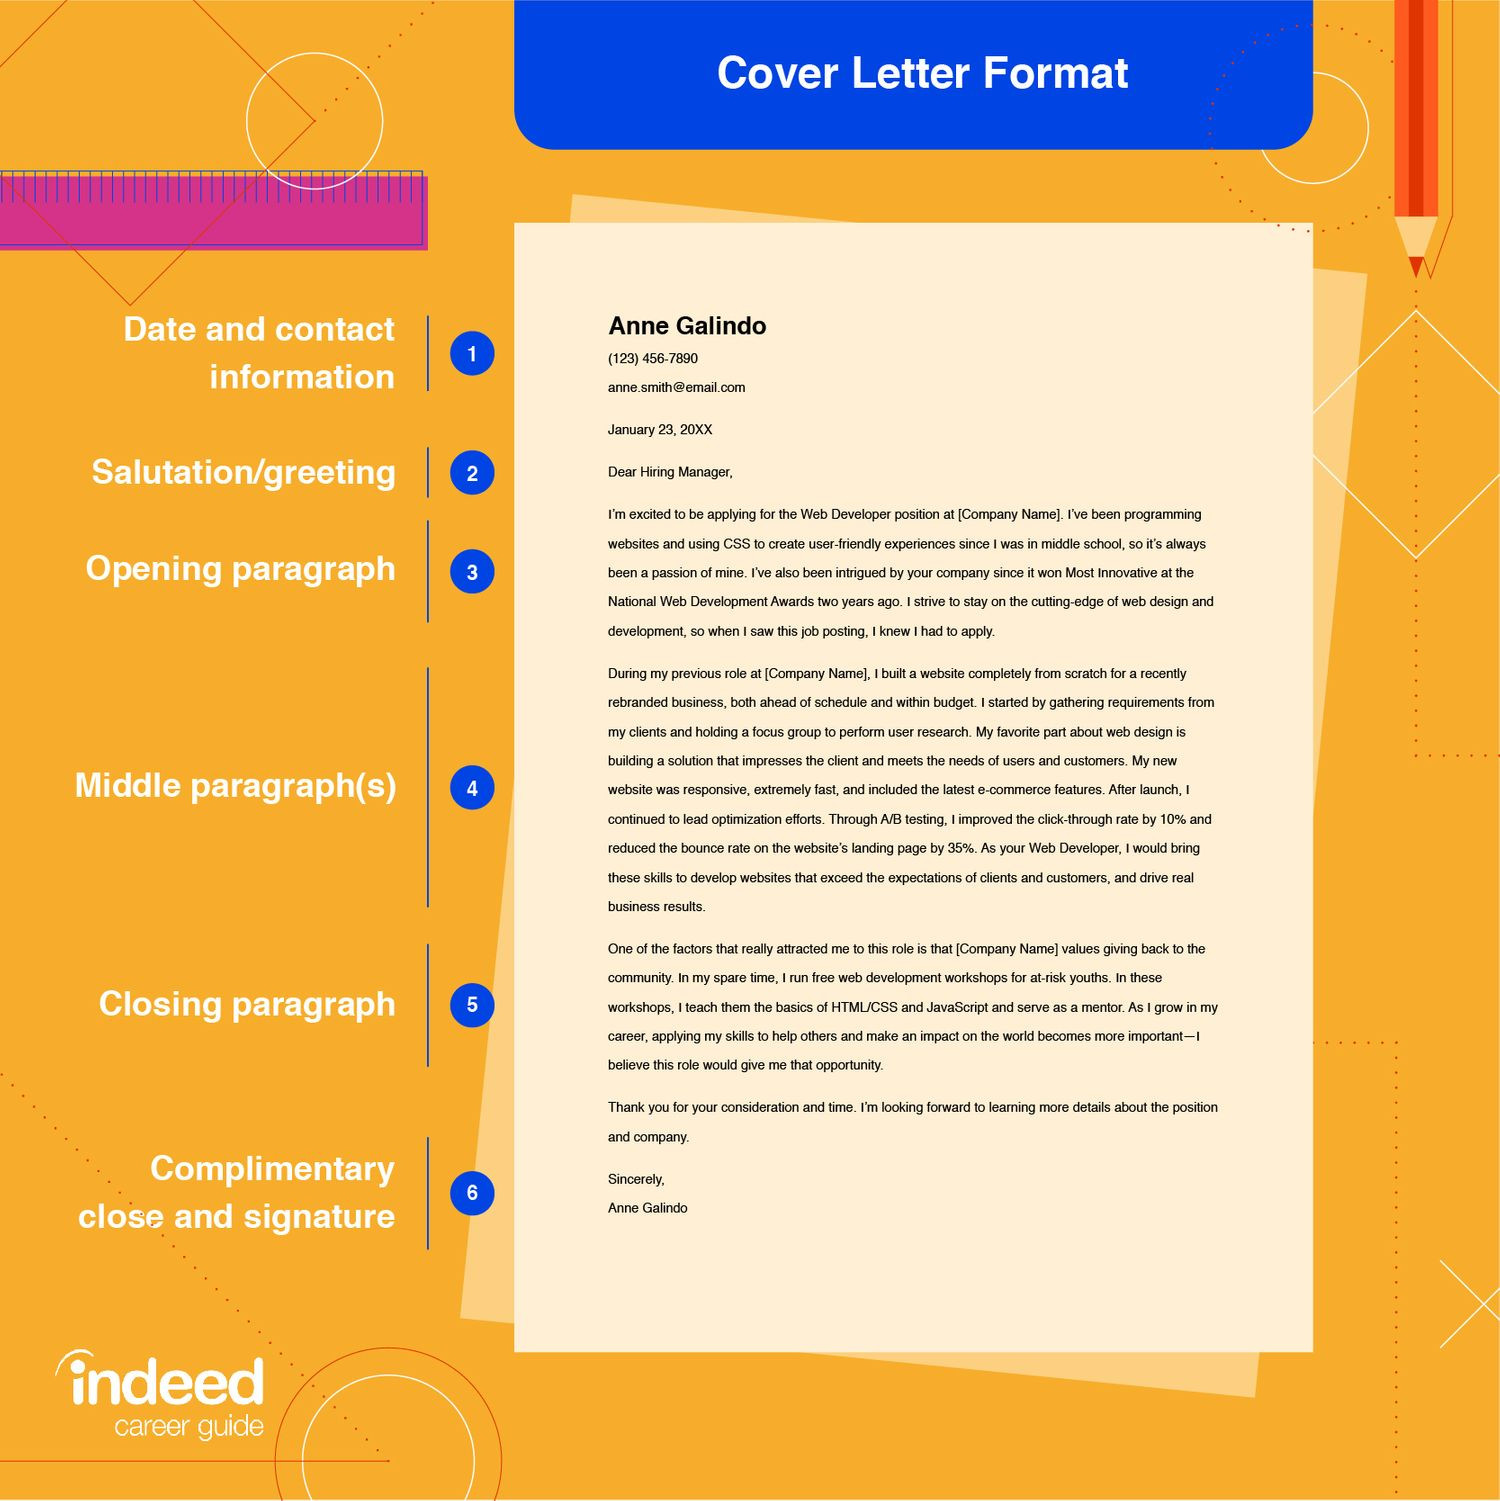 Emailing Resume and Cover Letter Message Sample How to Send An Email Cover Letter (with Example) Indeed.com